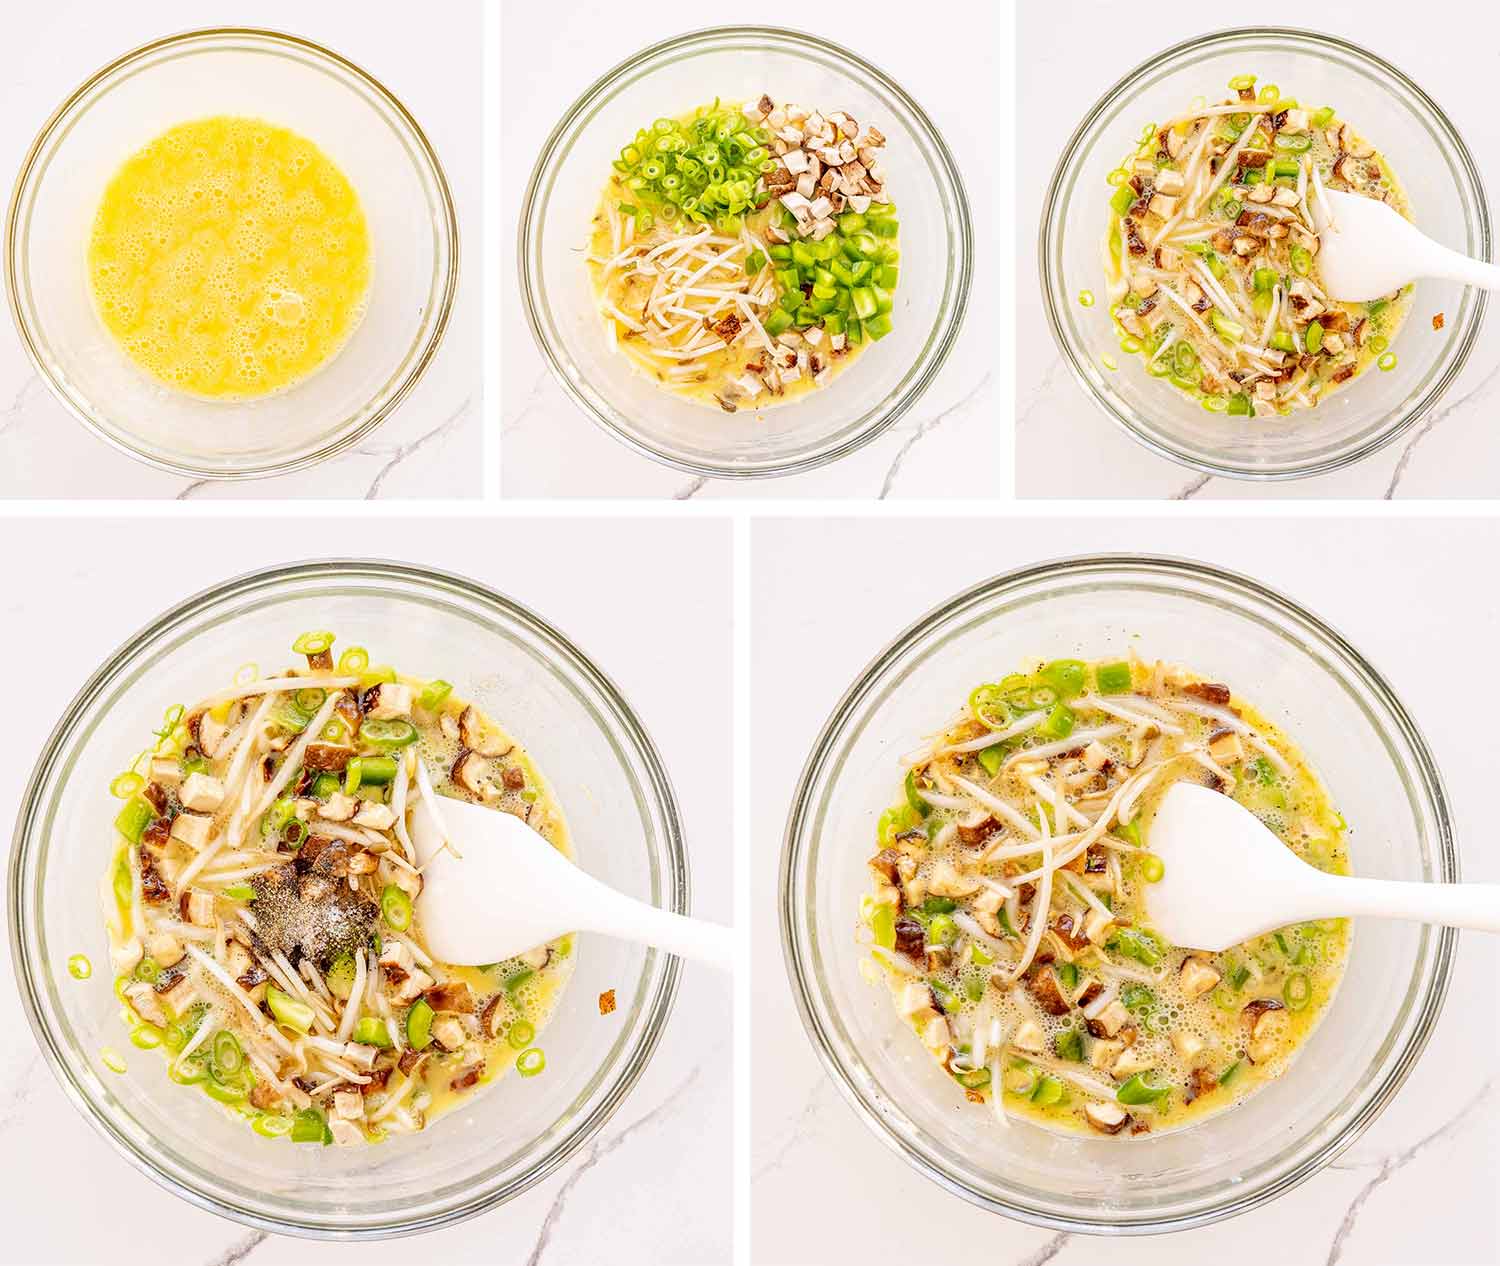 process shots showing how to make egg foo young.